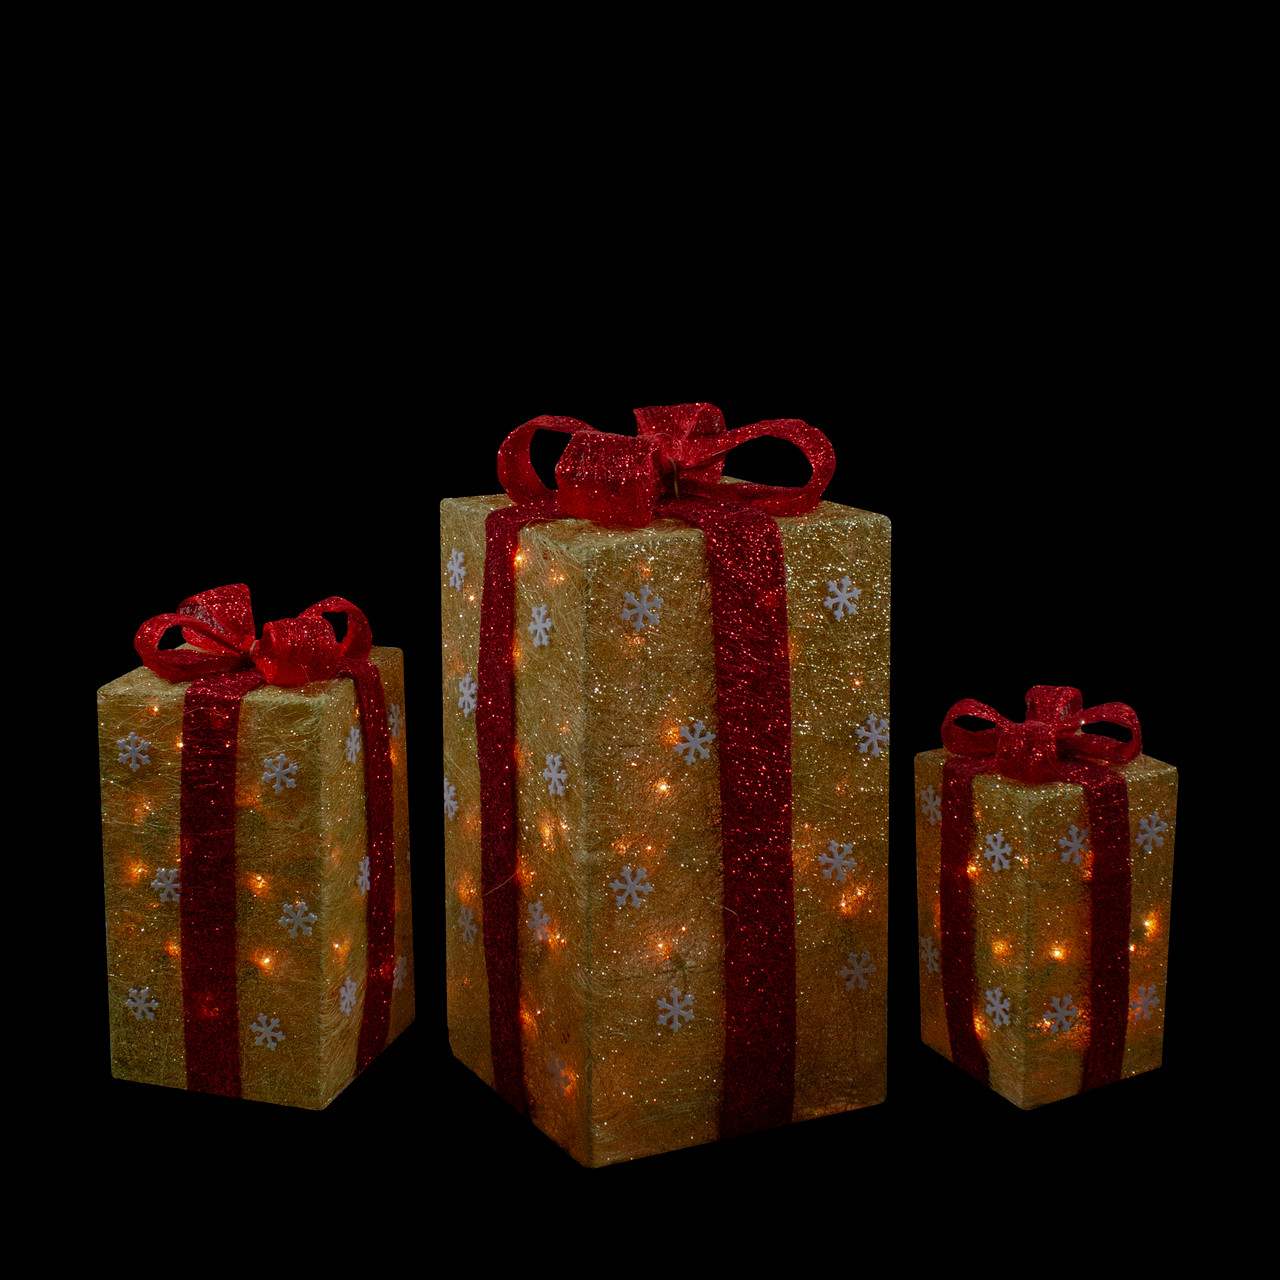 Set of 3 Lighted Green Gift Boxes with Red Bows Outdoor Christmas  Decorations 10